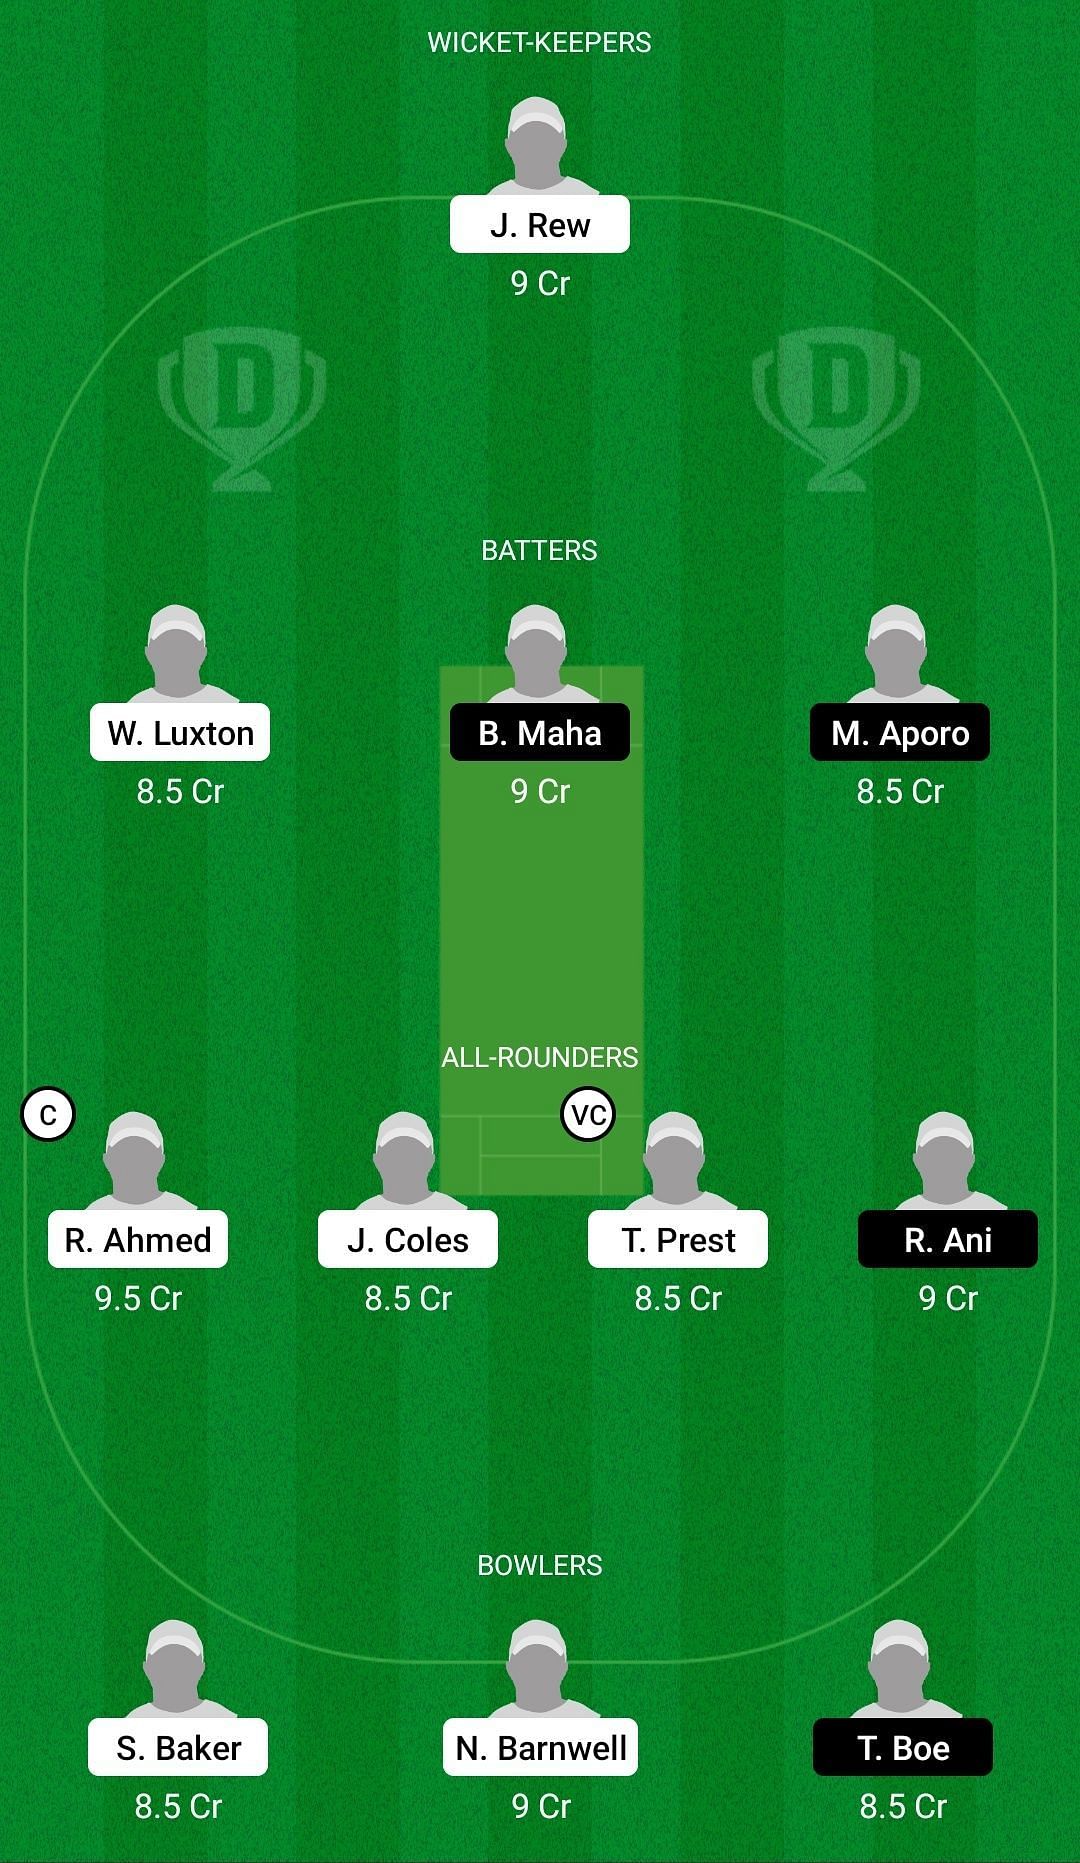 Dream11 Team for England Under-19 vs Papua New Guinea Under-19 - ICC Under-19 World Cup 2022 Warm-up Match.